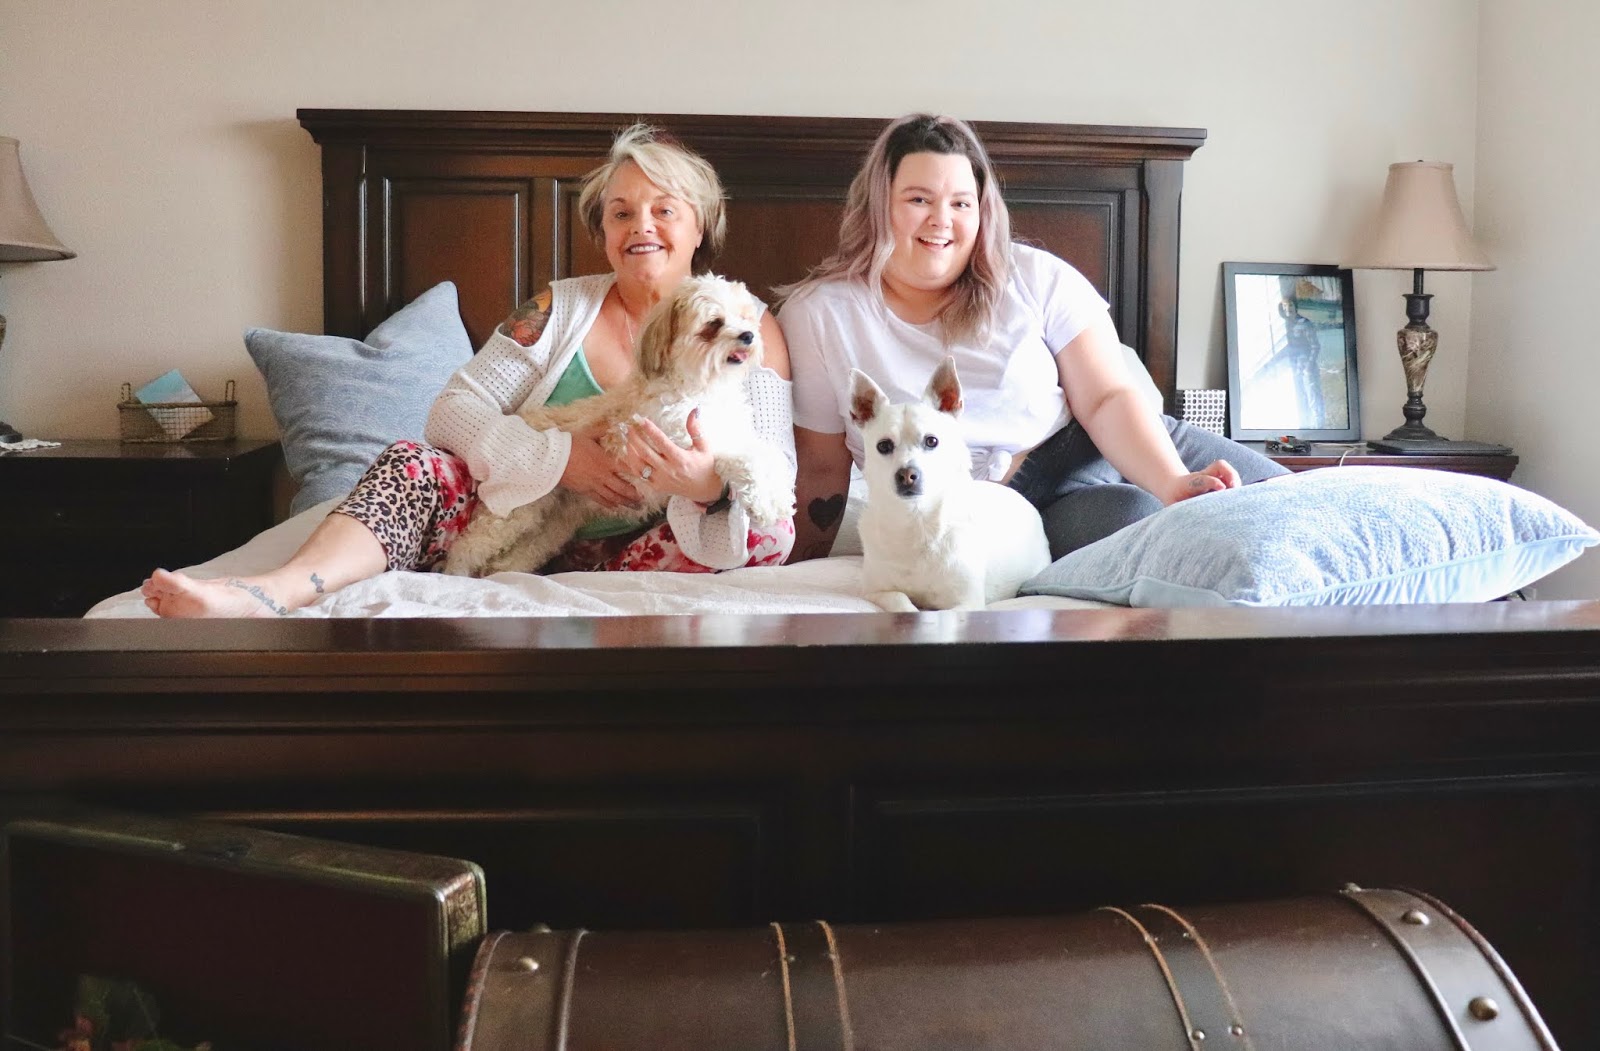 Chicago Plus Size Petite Fashion Blogger, YouTuber, and model Natalie Craig, of Natalie in the City, reviews Big Fig, the mattress made for a bigger figure, and shares how she bought the perfect mothers day gift!